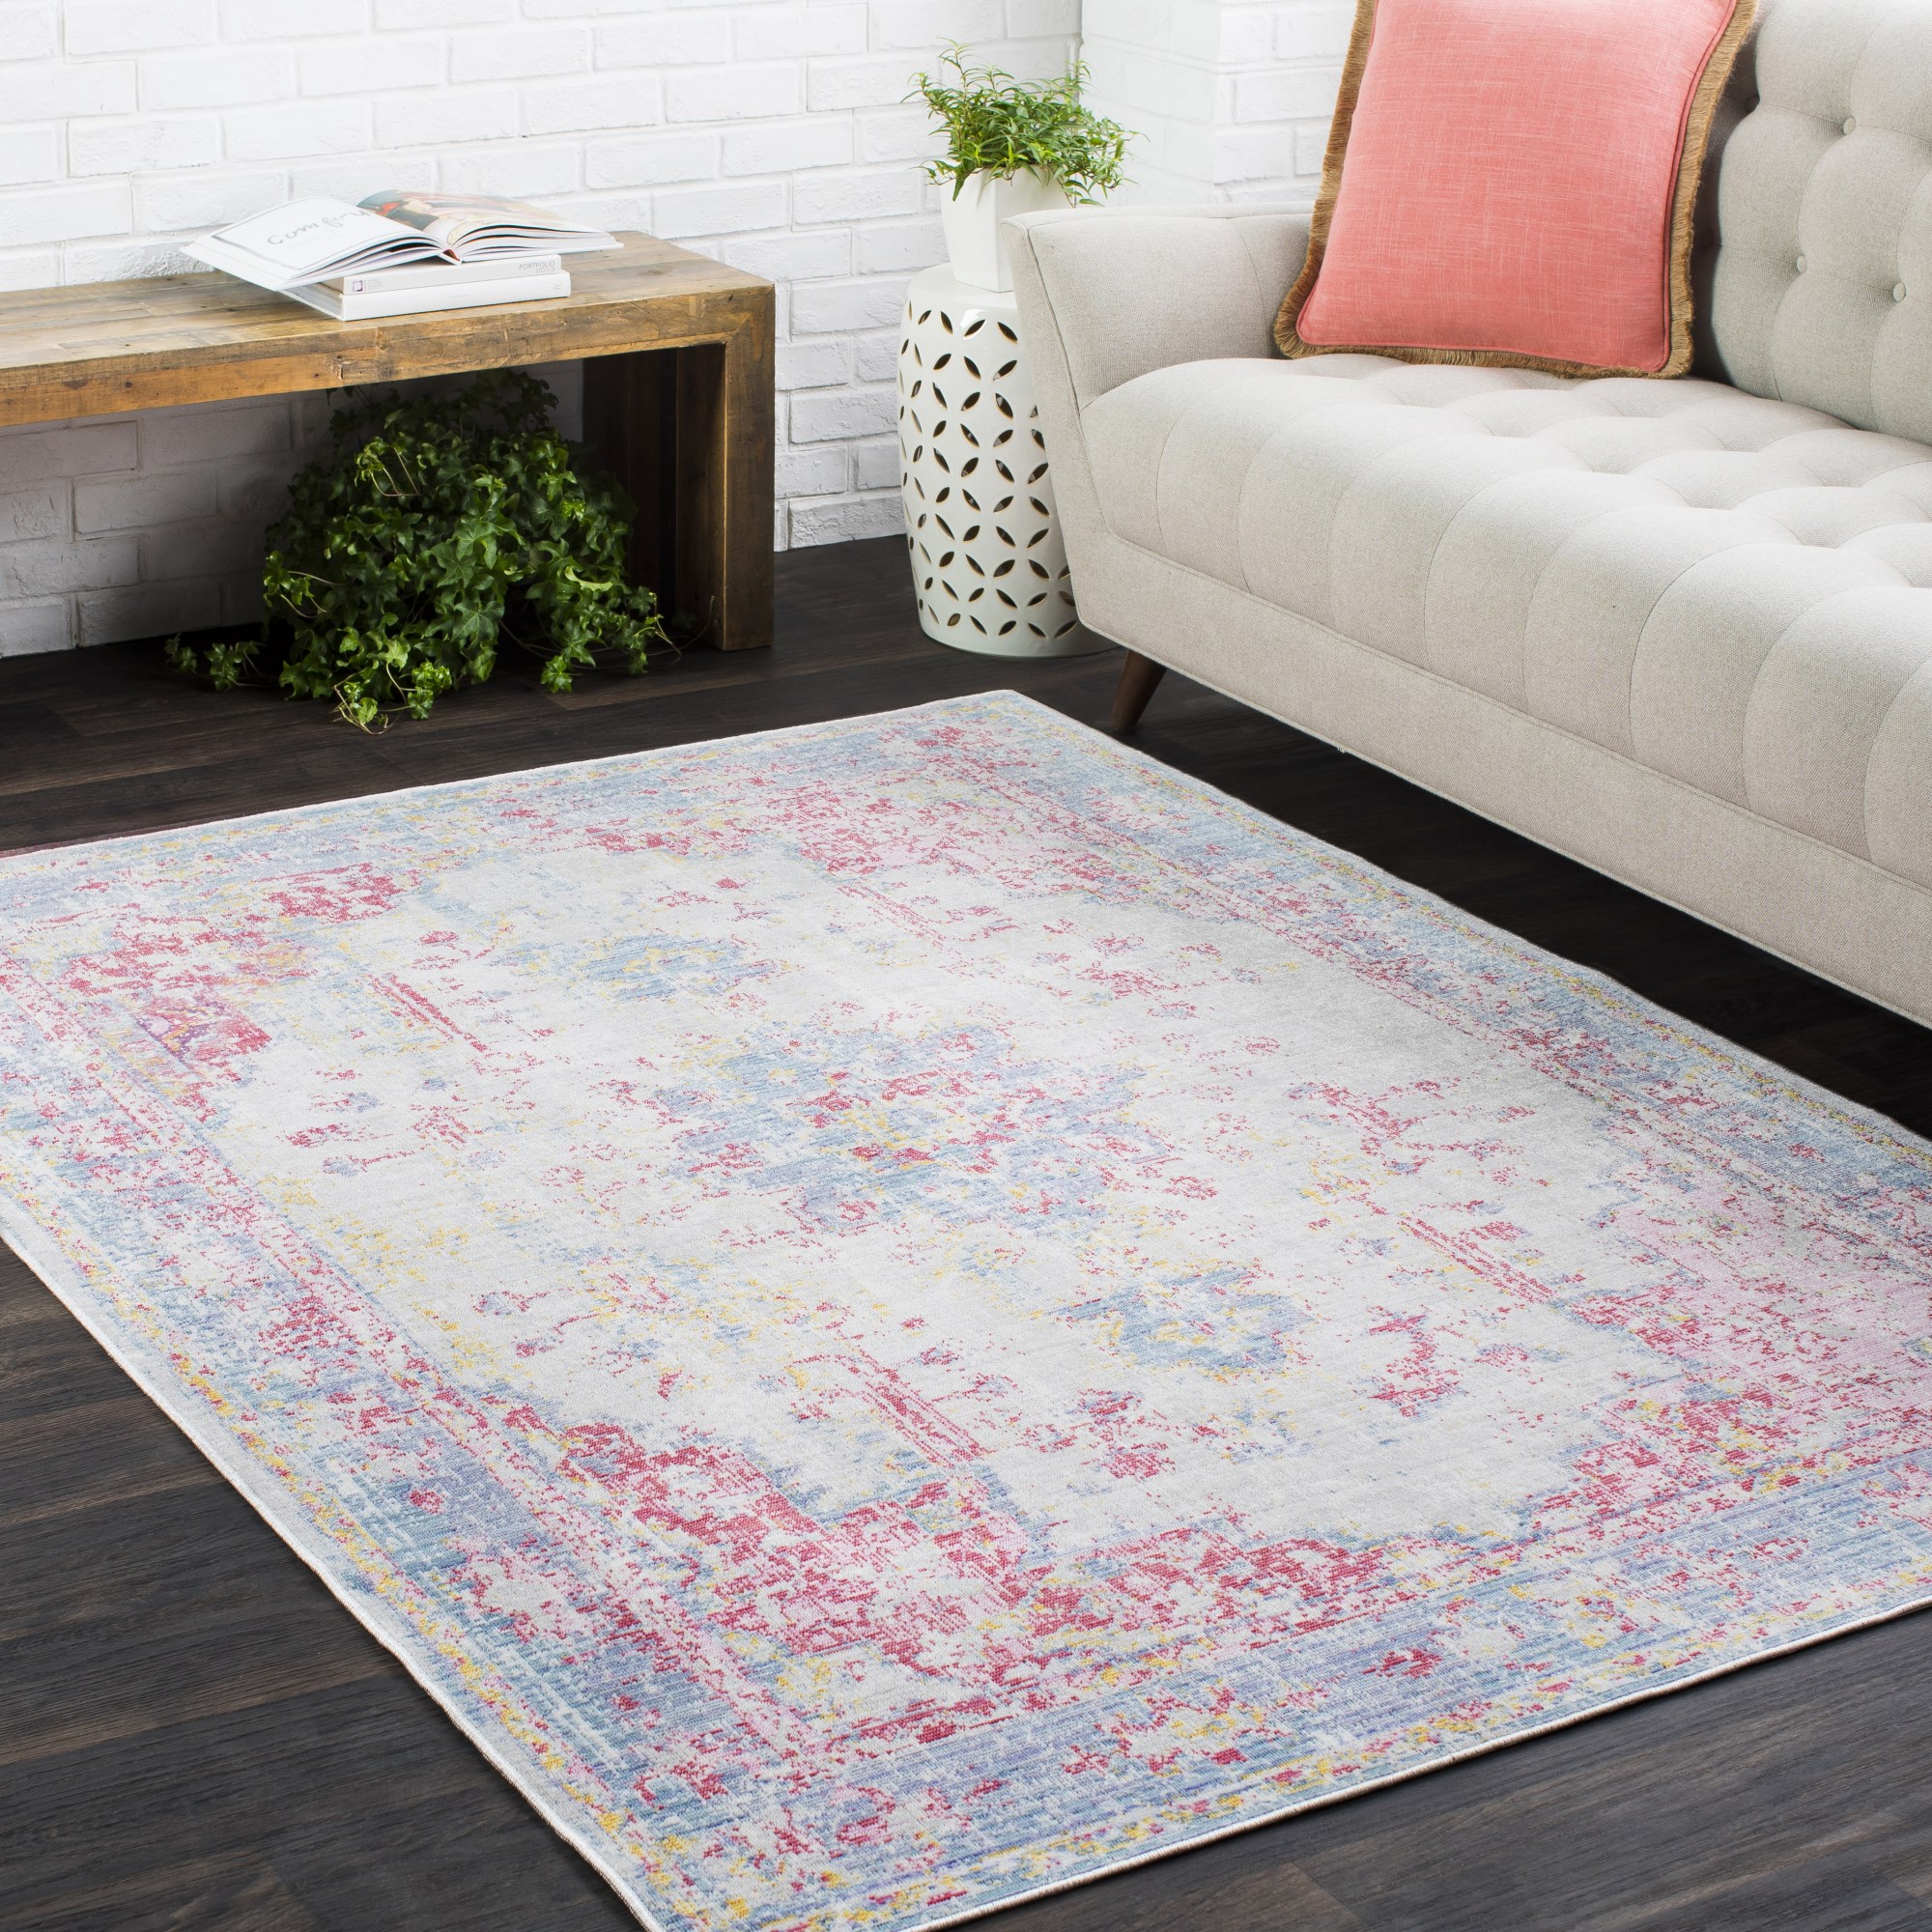 Windley Distressed Pale Pink/Gray Area Rug Bungalow Rose Rug Size: Rectangle 5'3 x 7'3